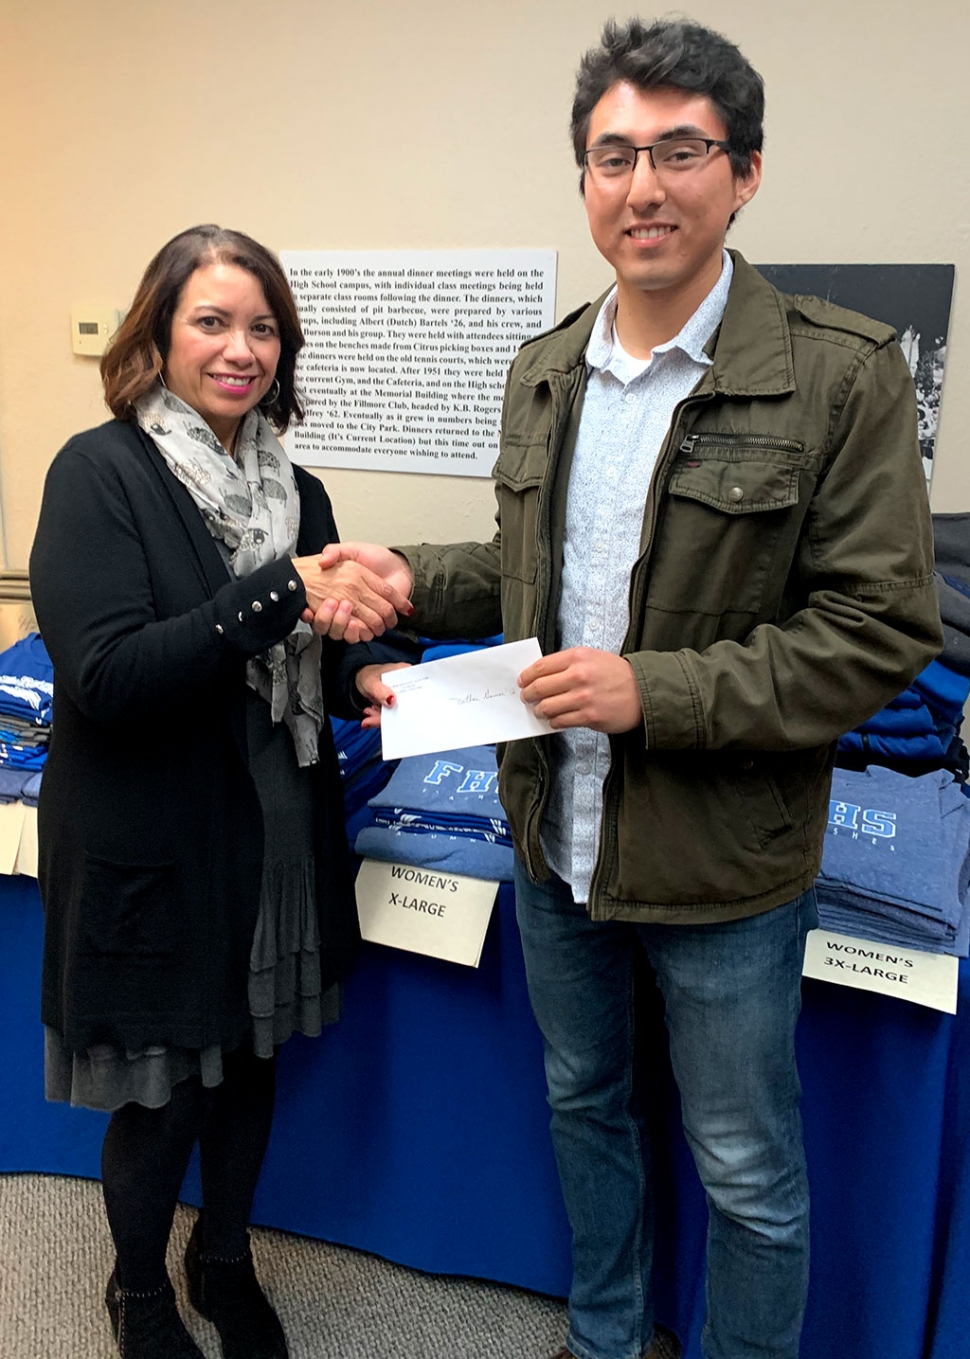 Pictured is Alumni Board member and Scholarship Committee member Tricia “Urrea” Gradias (FHS class of 78), along with Alvaro Nathan Garnica (FHS class of 2012) who is one of the 2019 Continuing Education Grant awardees.